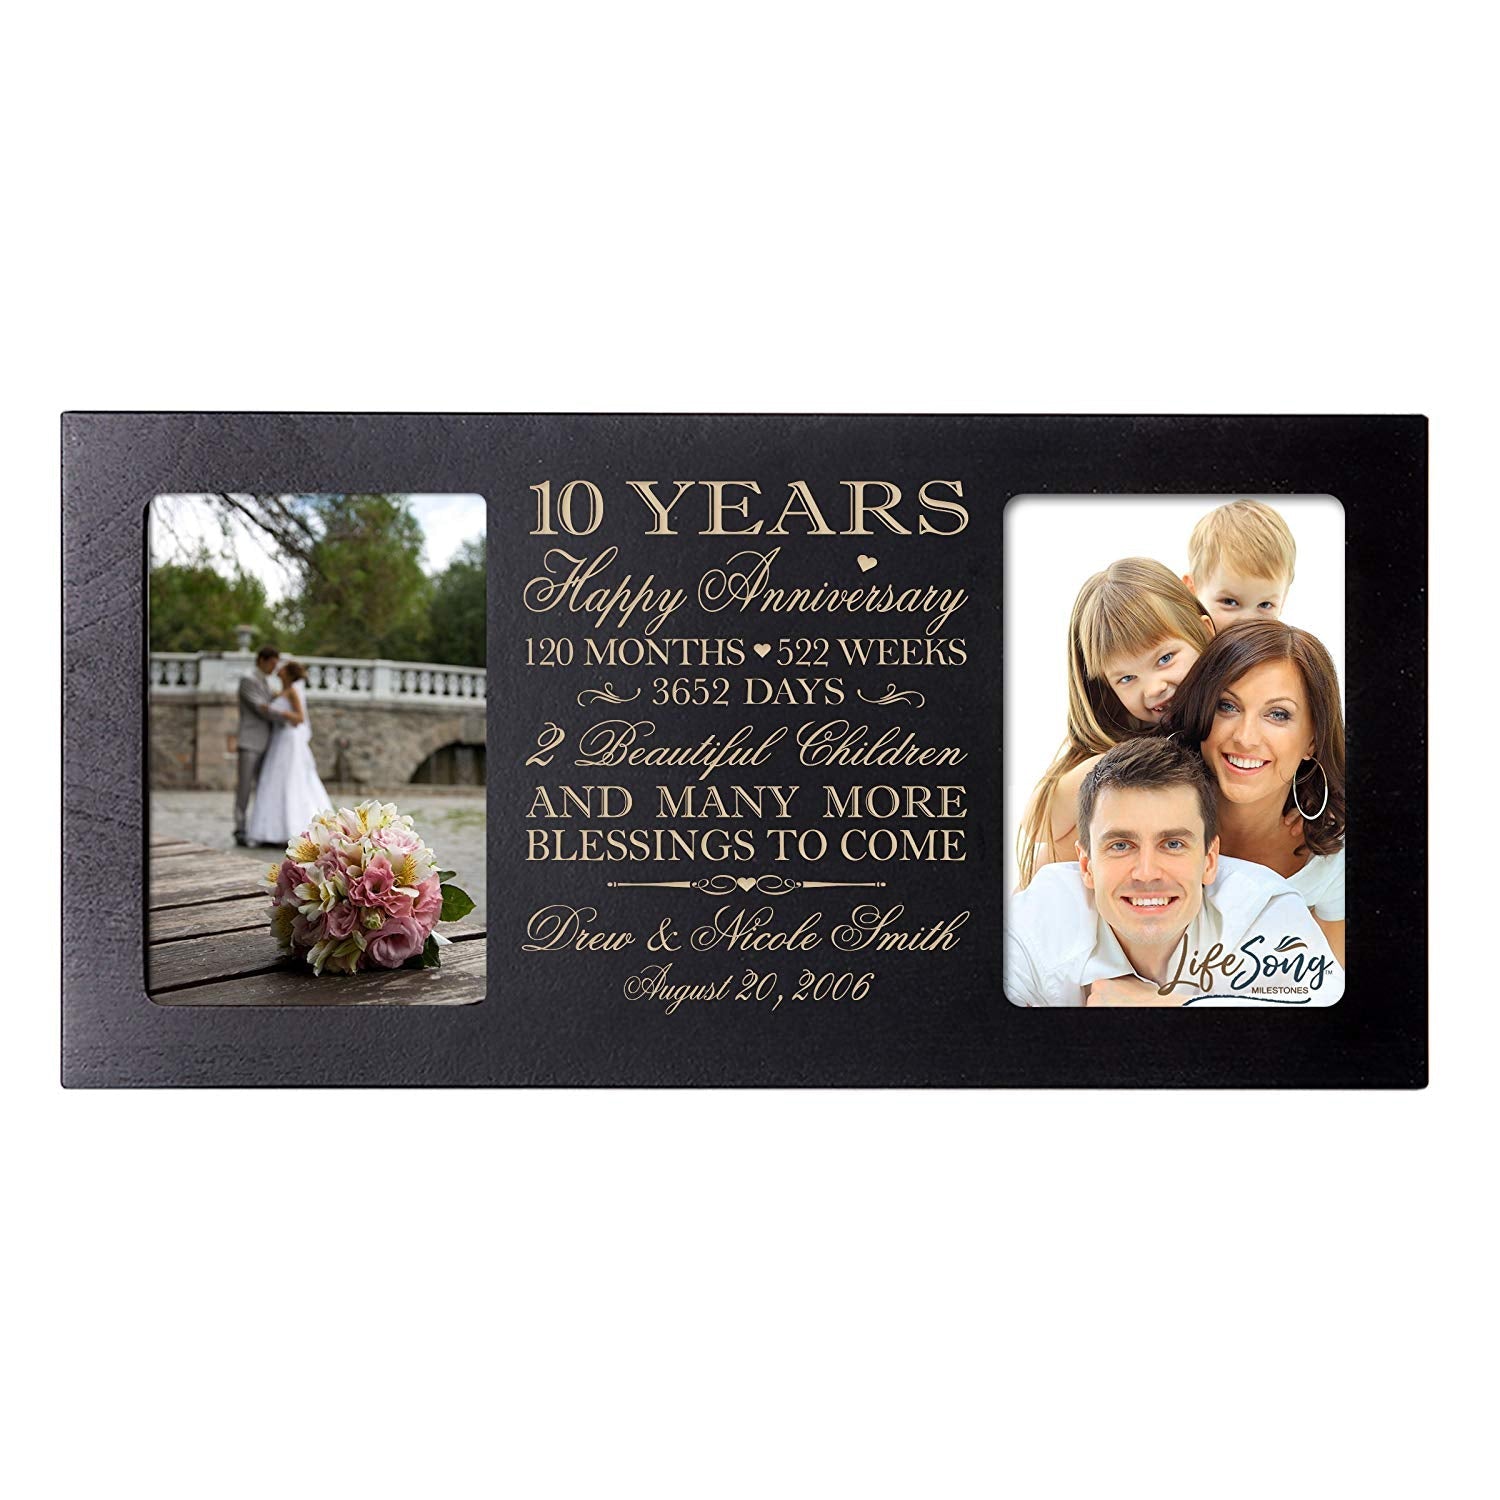 Personalized Picture Frame for Couples 10th Wedding Anniversary Decorations